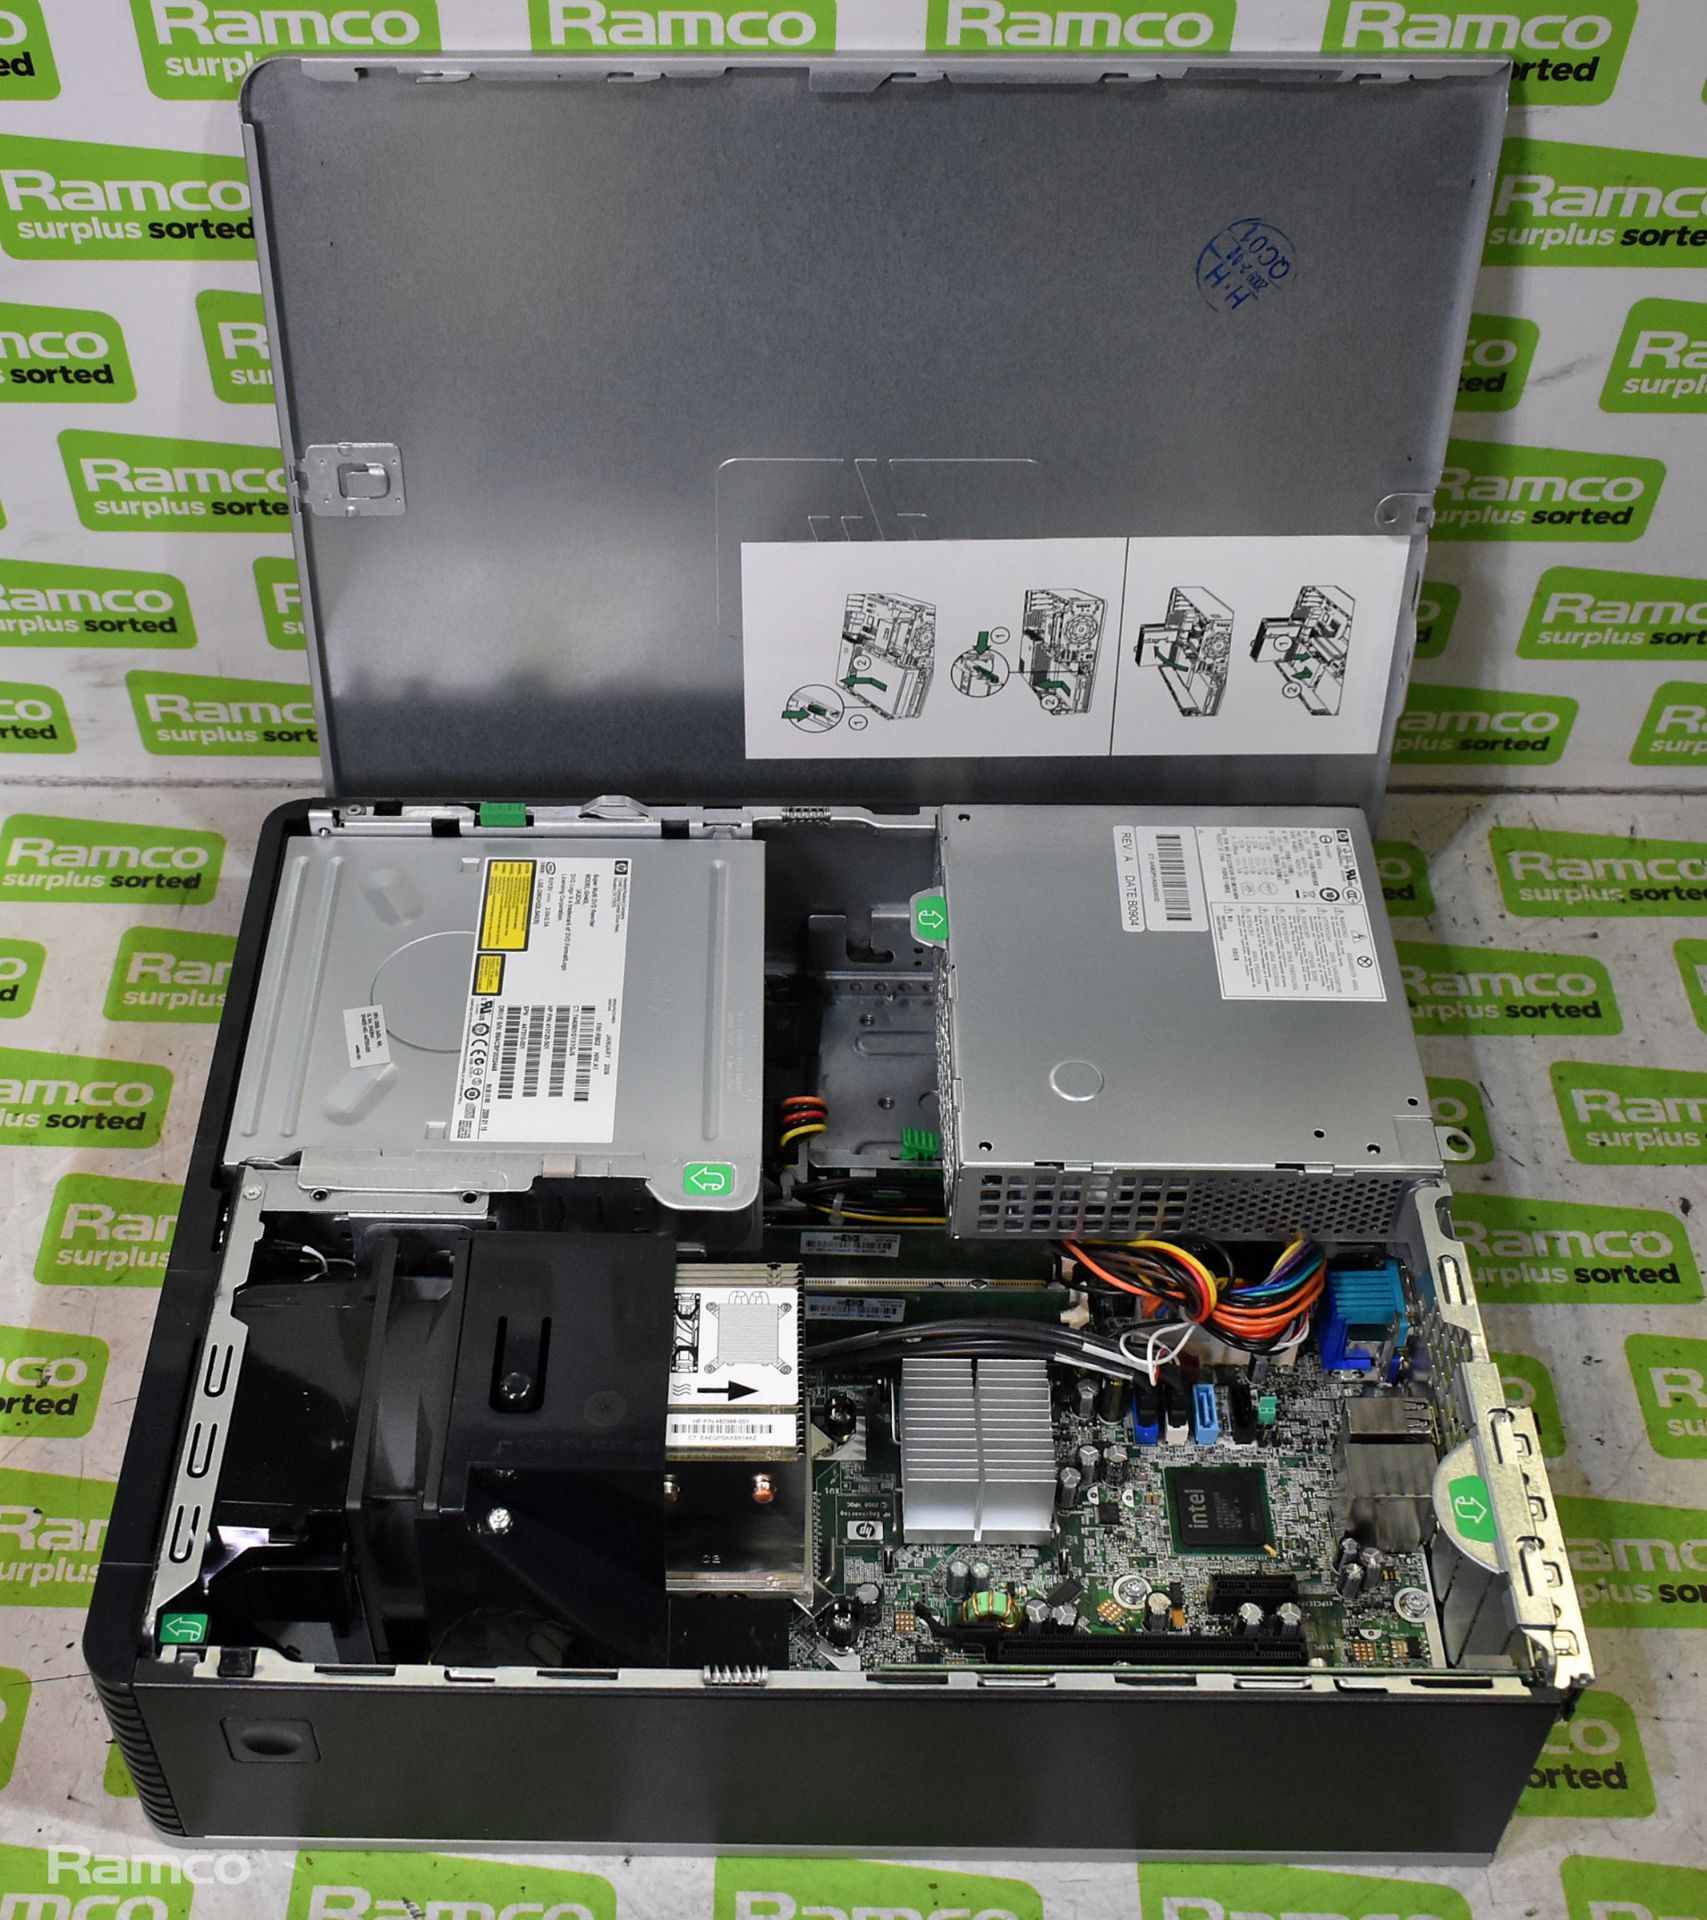 HP Compaq dc7900 small form factor computer with keyboard and mouse - NO HARD DRIVE - Image 6 of 11